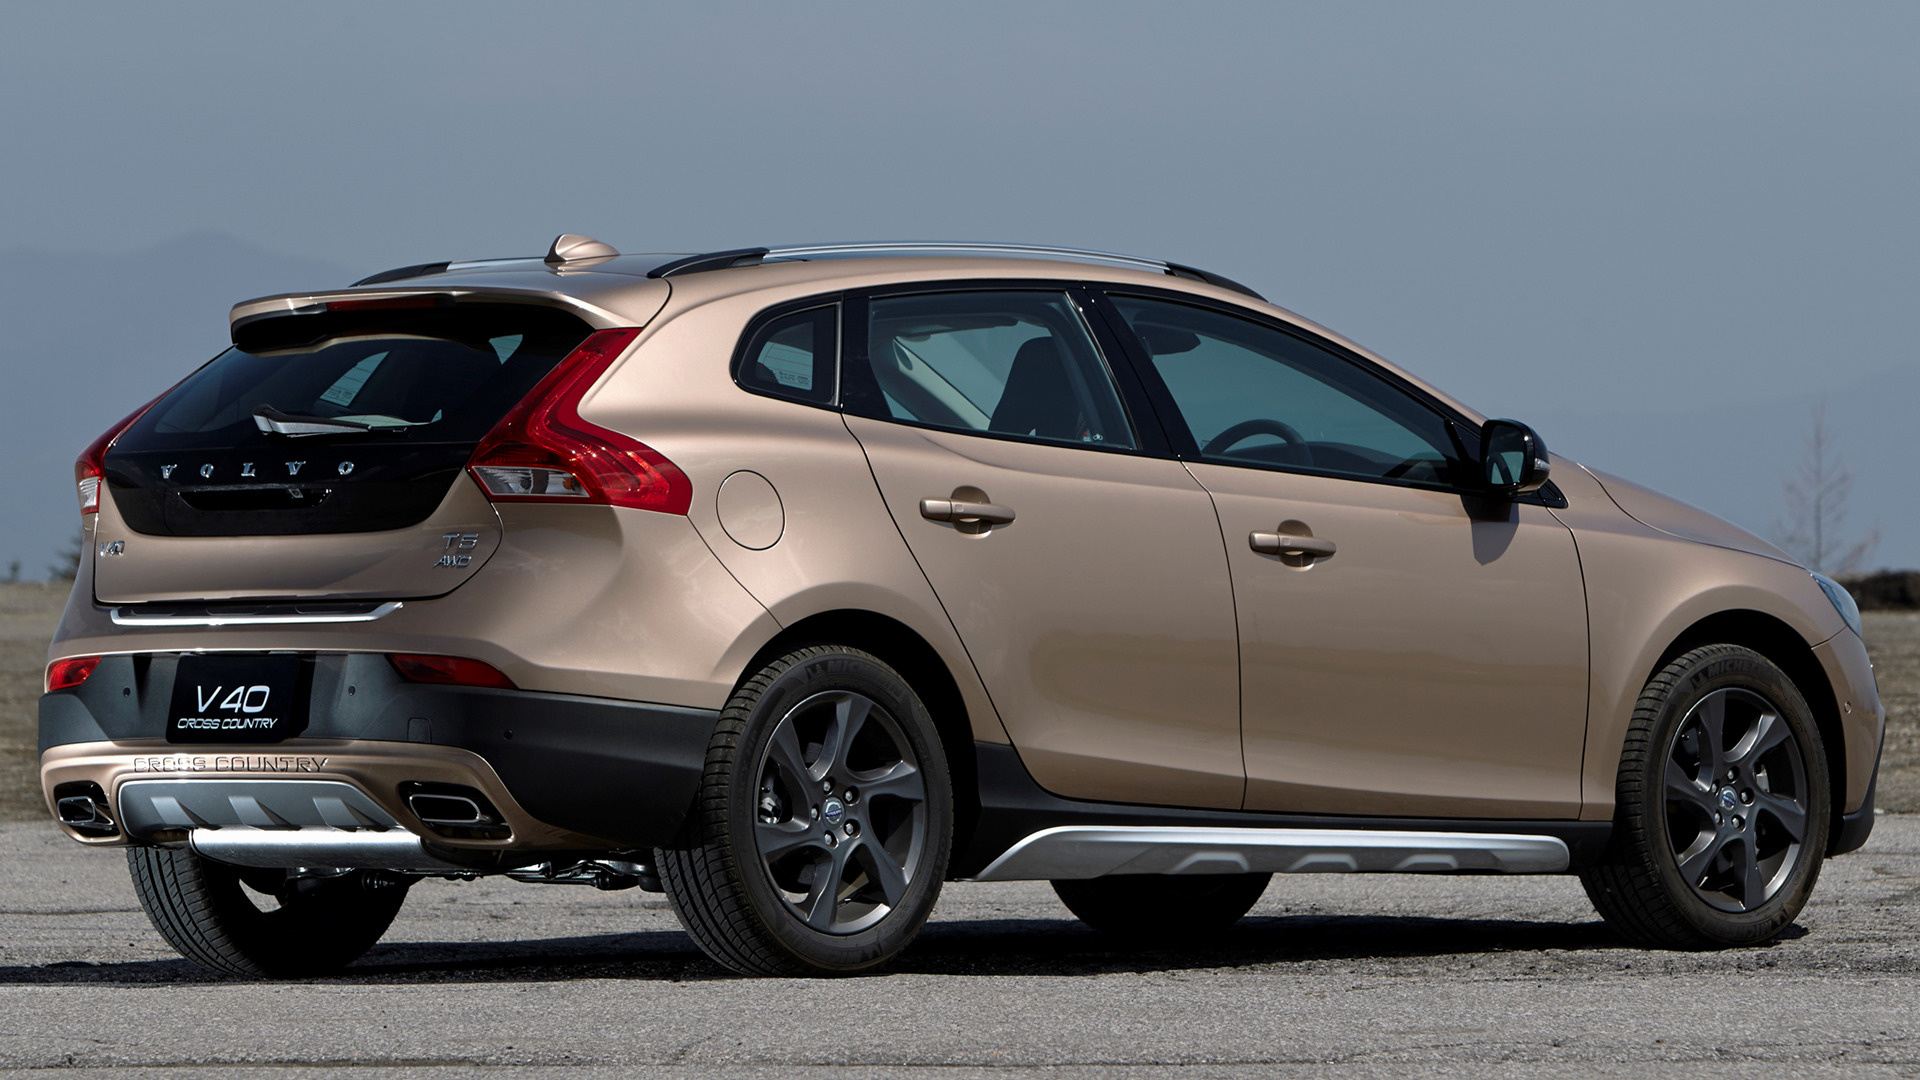 2013 Volvo V40 Cross Country (JP) Wallpapers and HD